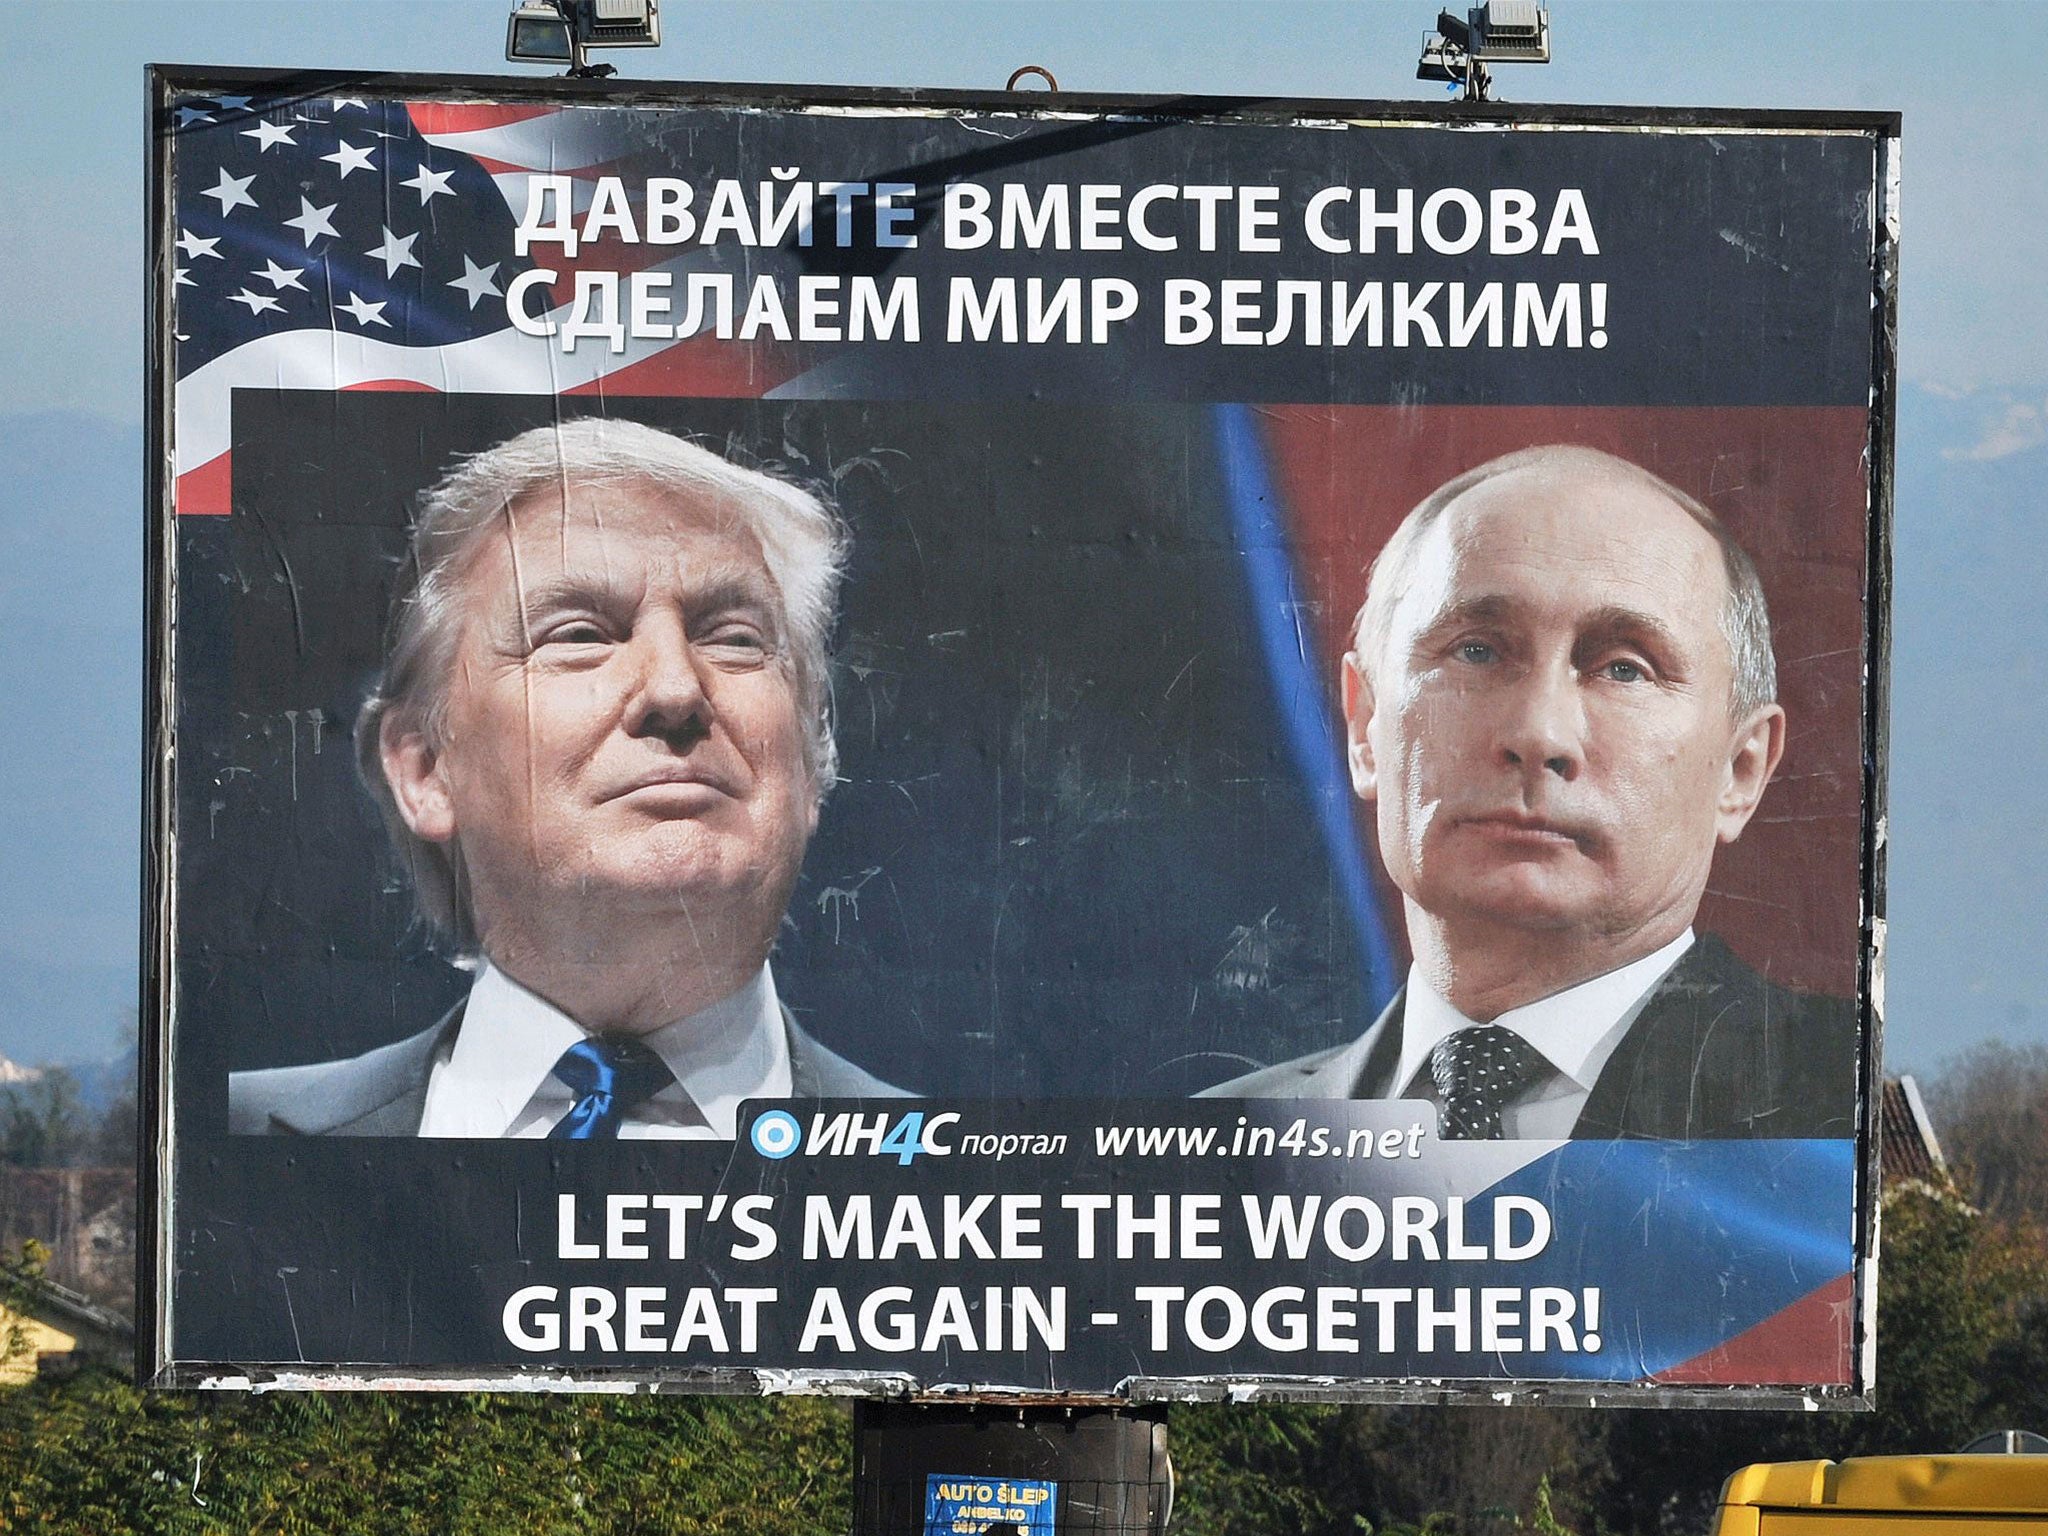 A poster showing US President Donald Trump and Russian President Vladimir Putin